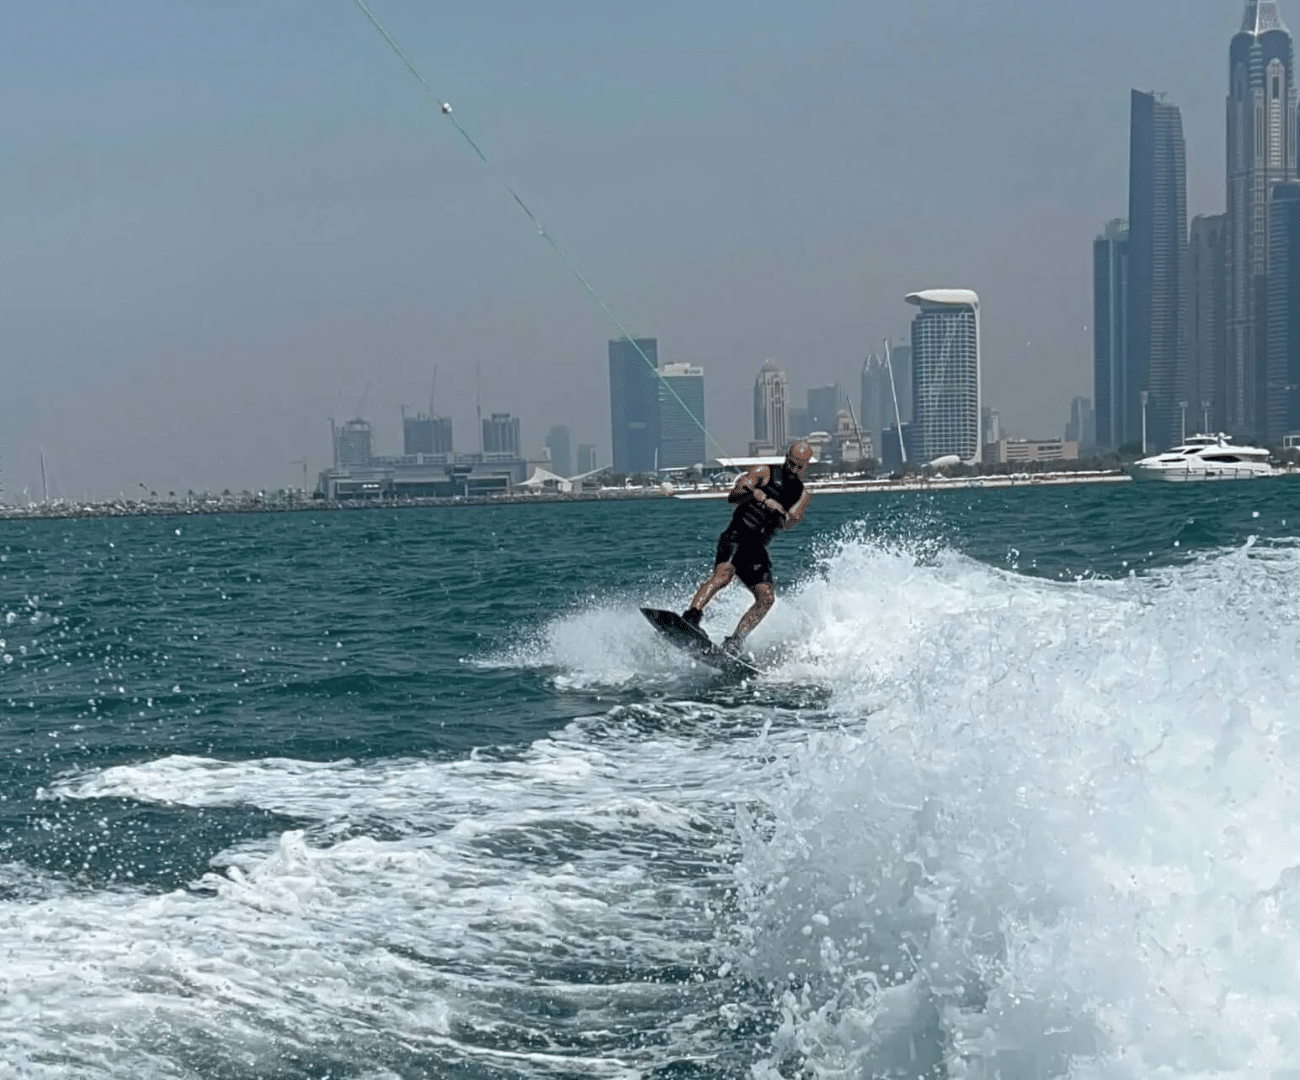 The Dubai tour package includes wakeboarding